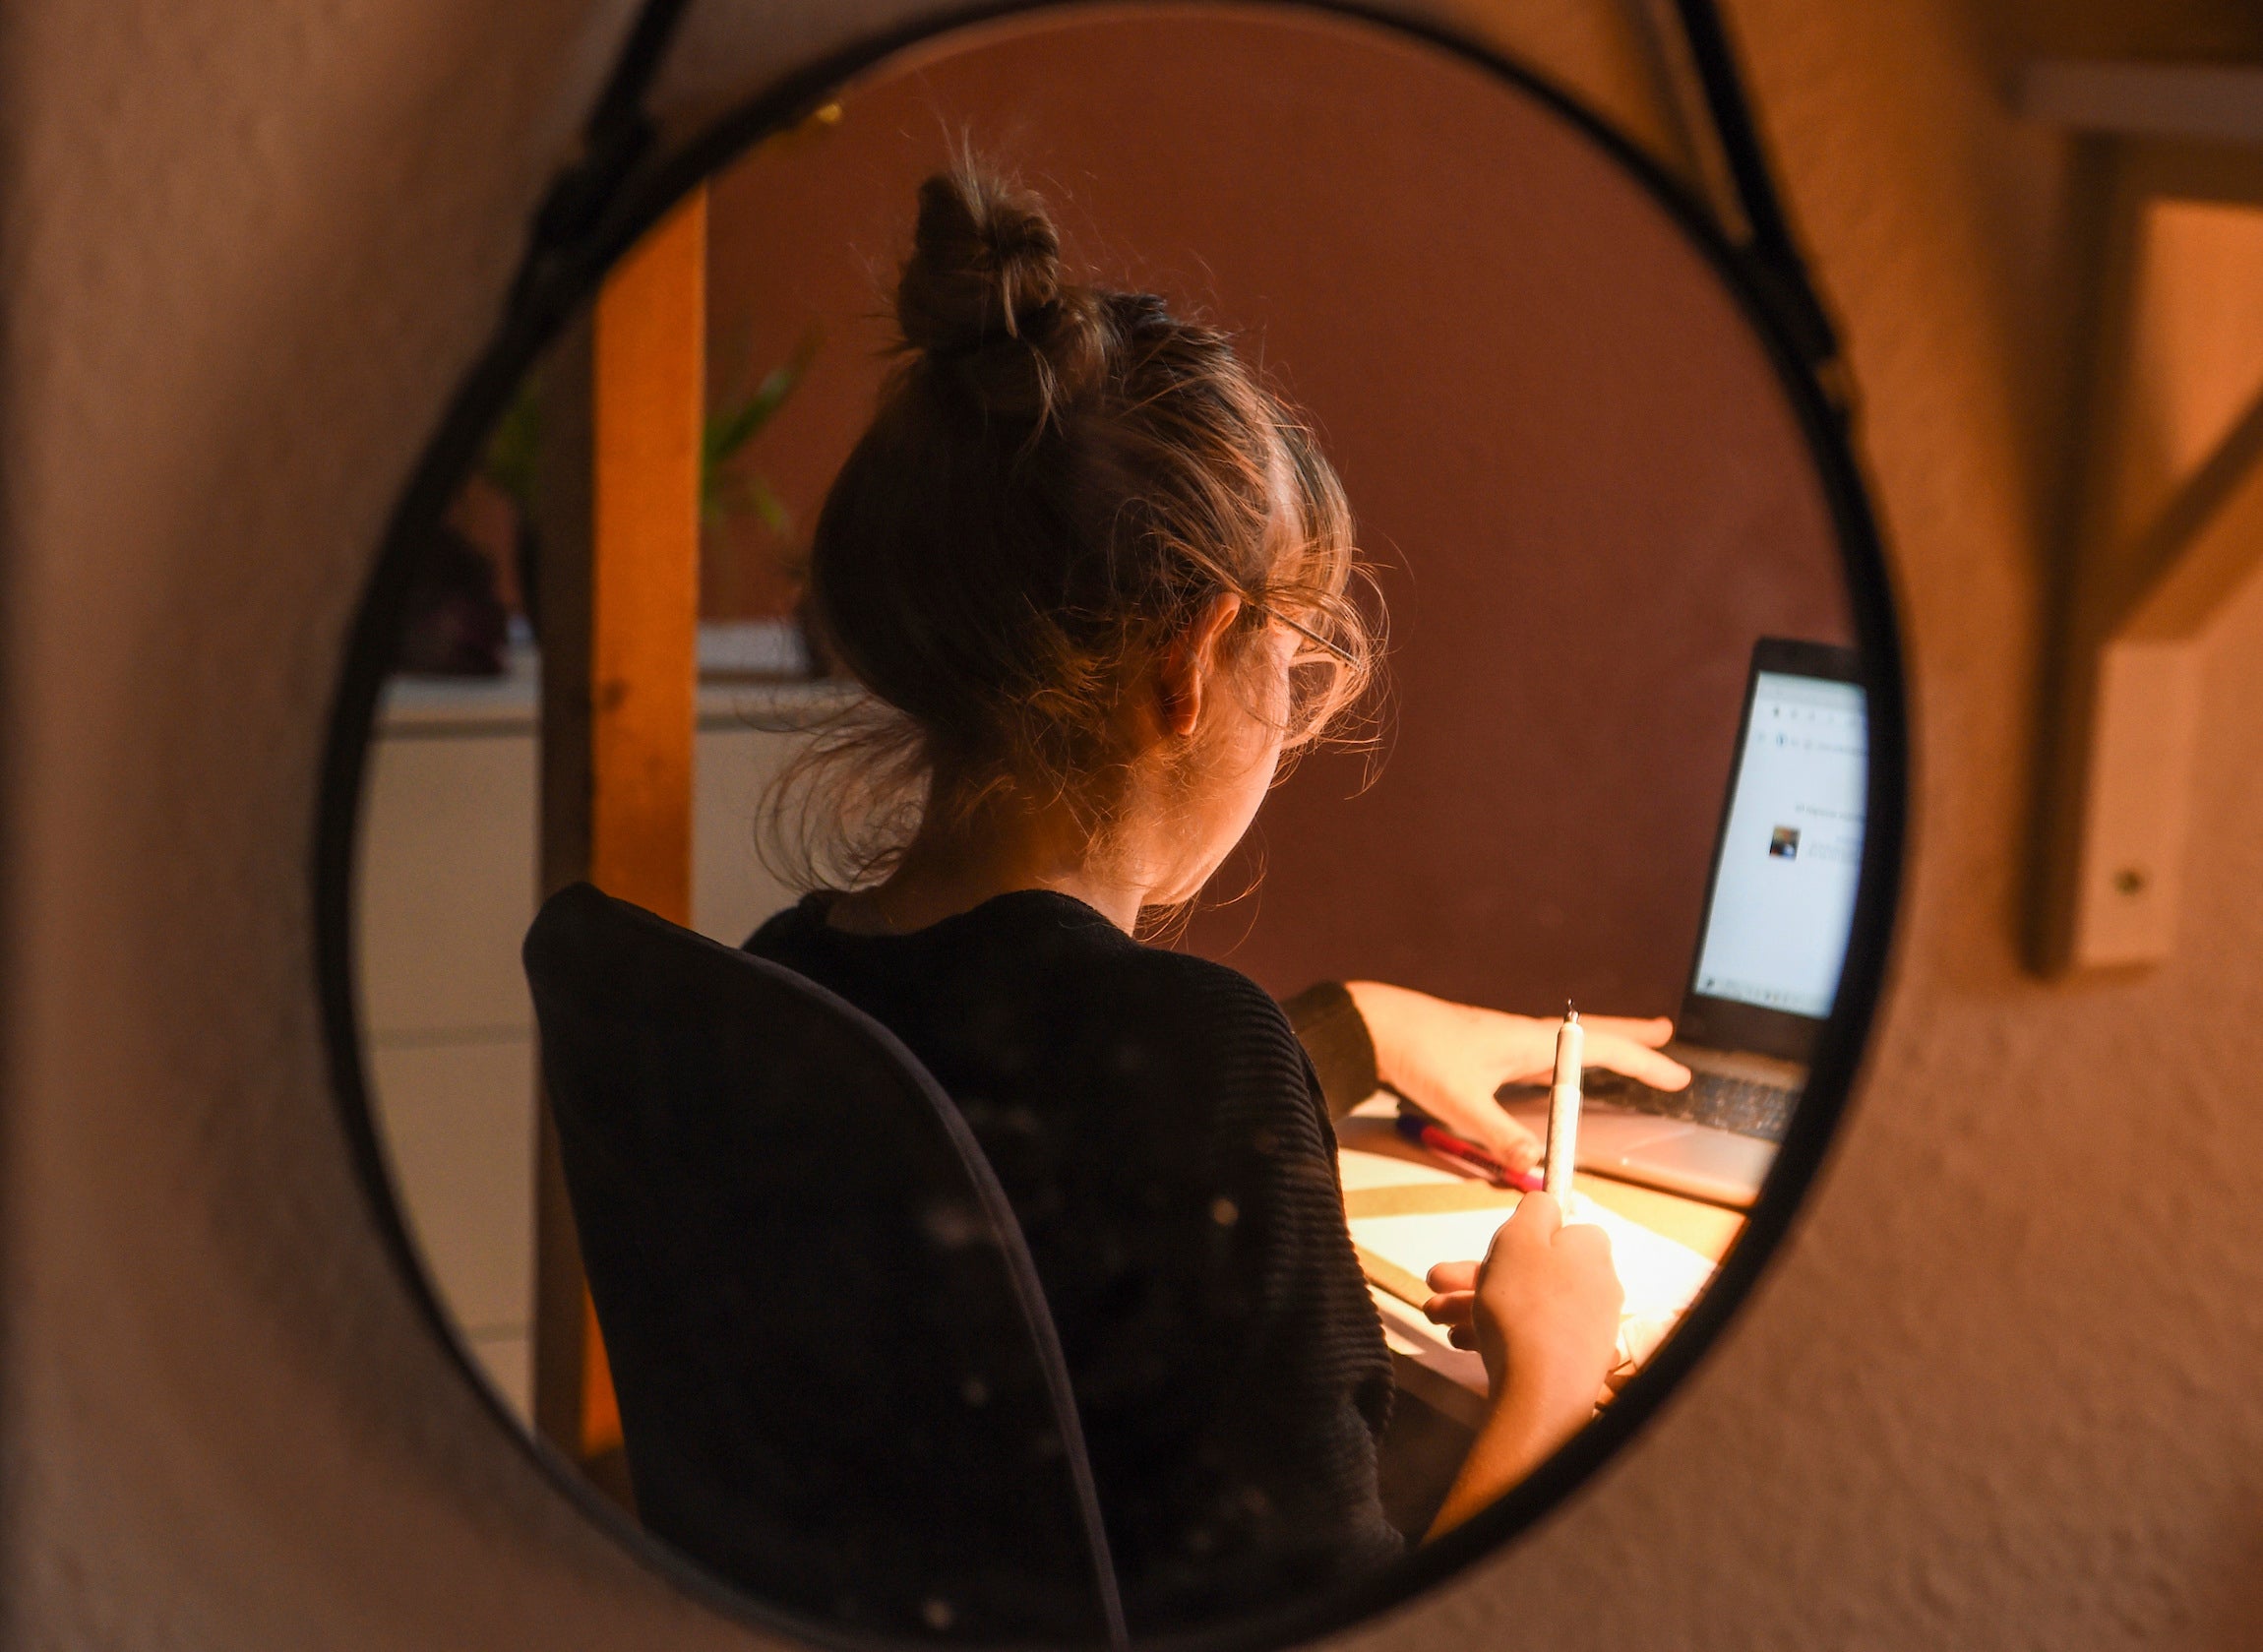 A girl studies online at home during Covid-19 school closures in Berlin.